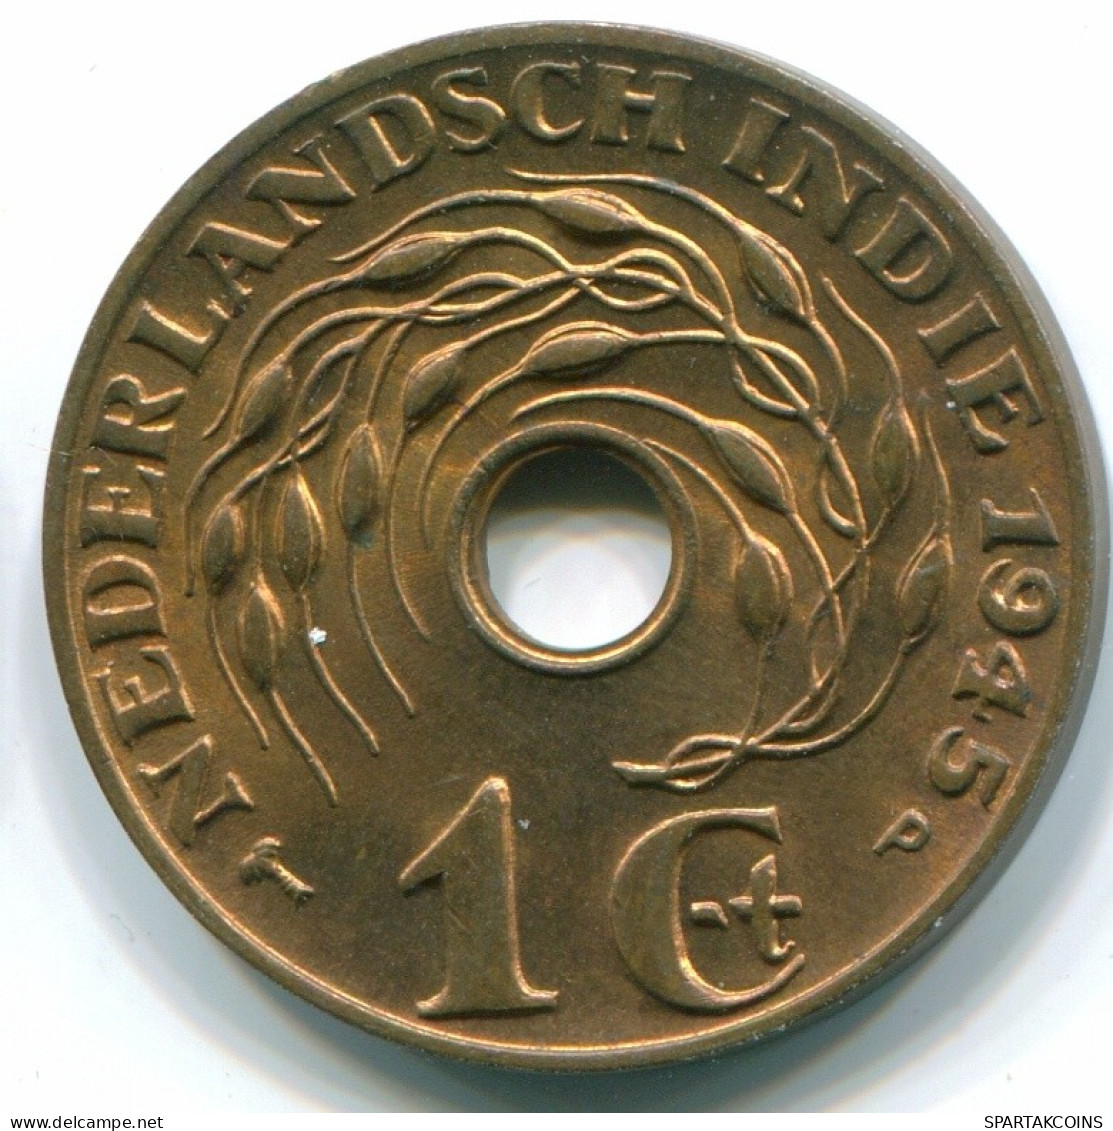 1 CENT 1945 P NETHERLANDS EAST INDIES INDONESIA Bronze Colonial Coin #S10360.U.A - Indes Neerlandesas